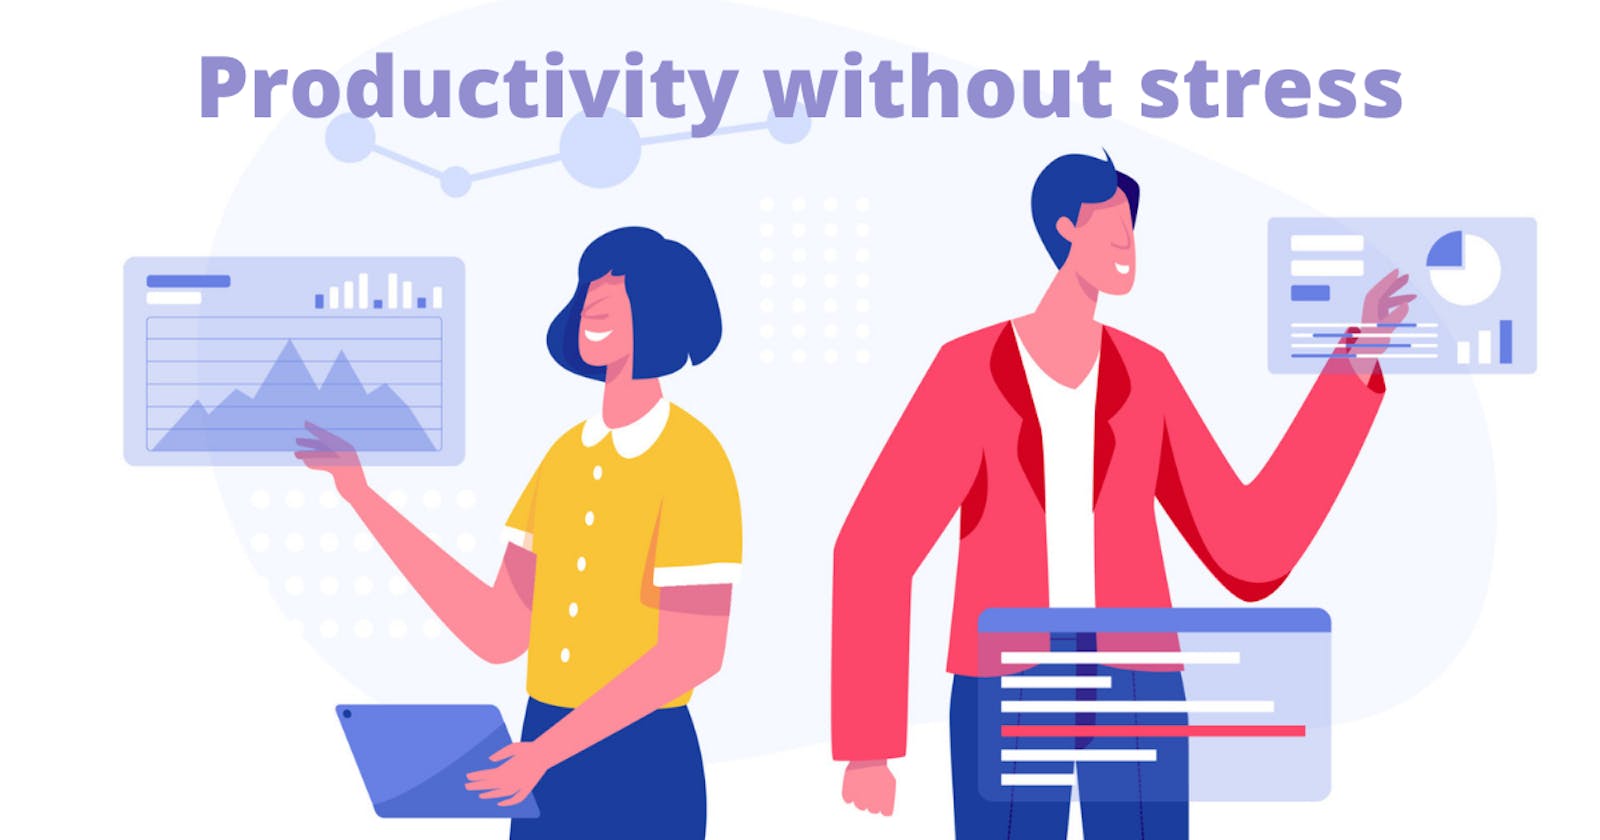 How to be more productive without stress?